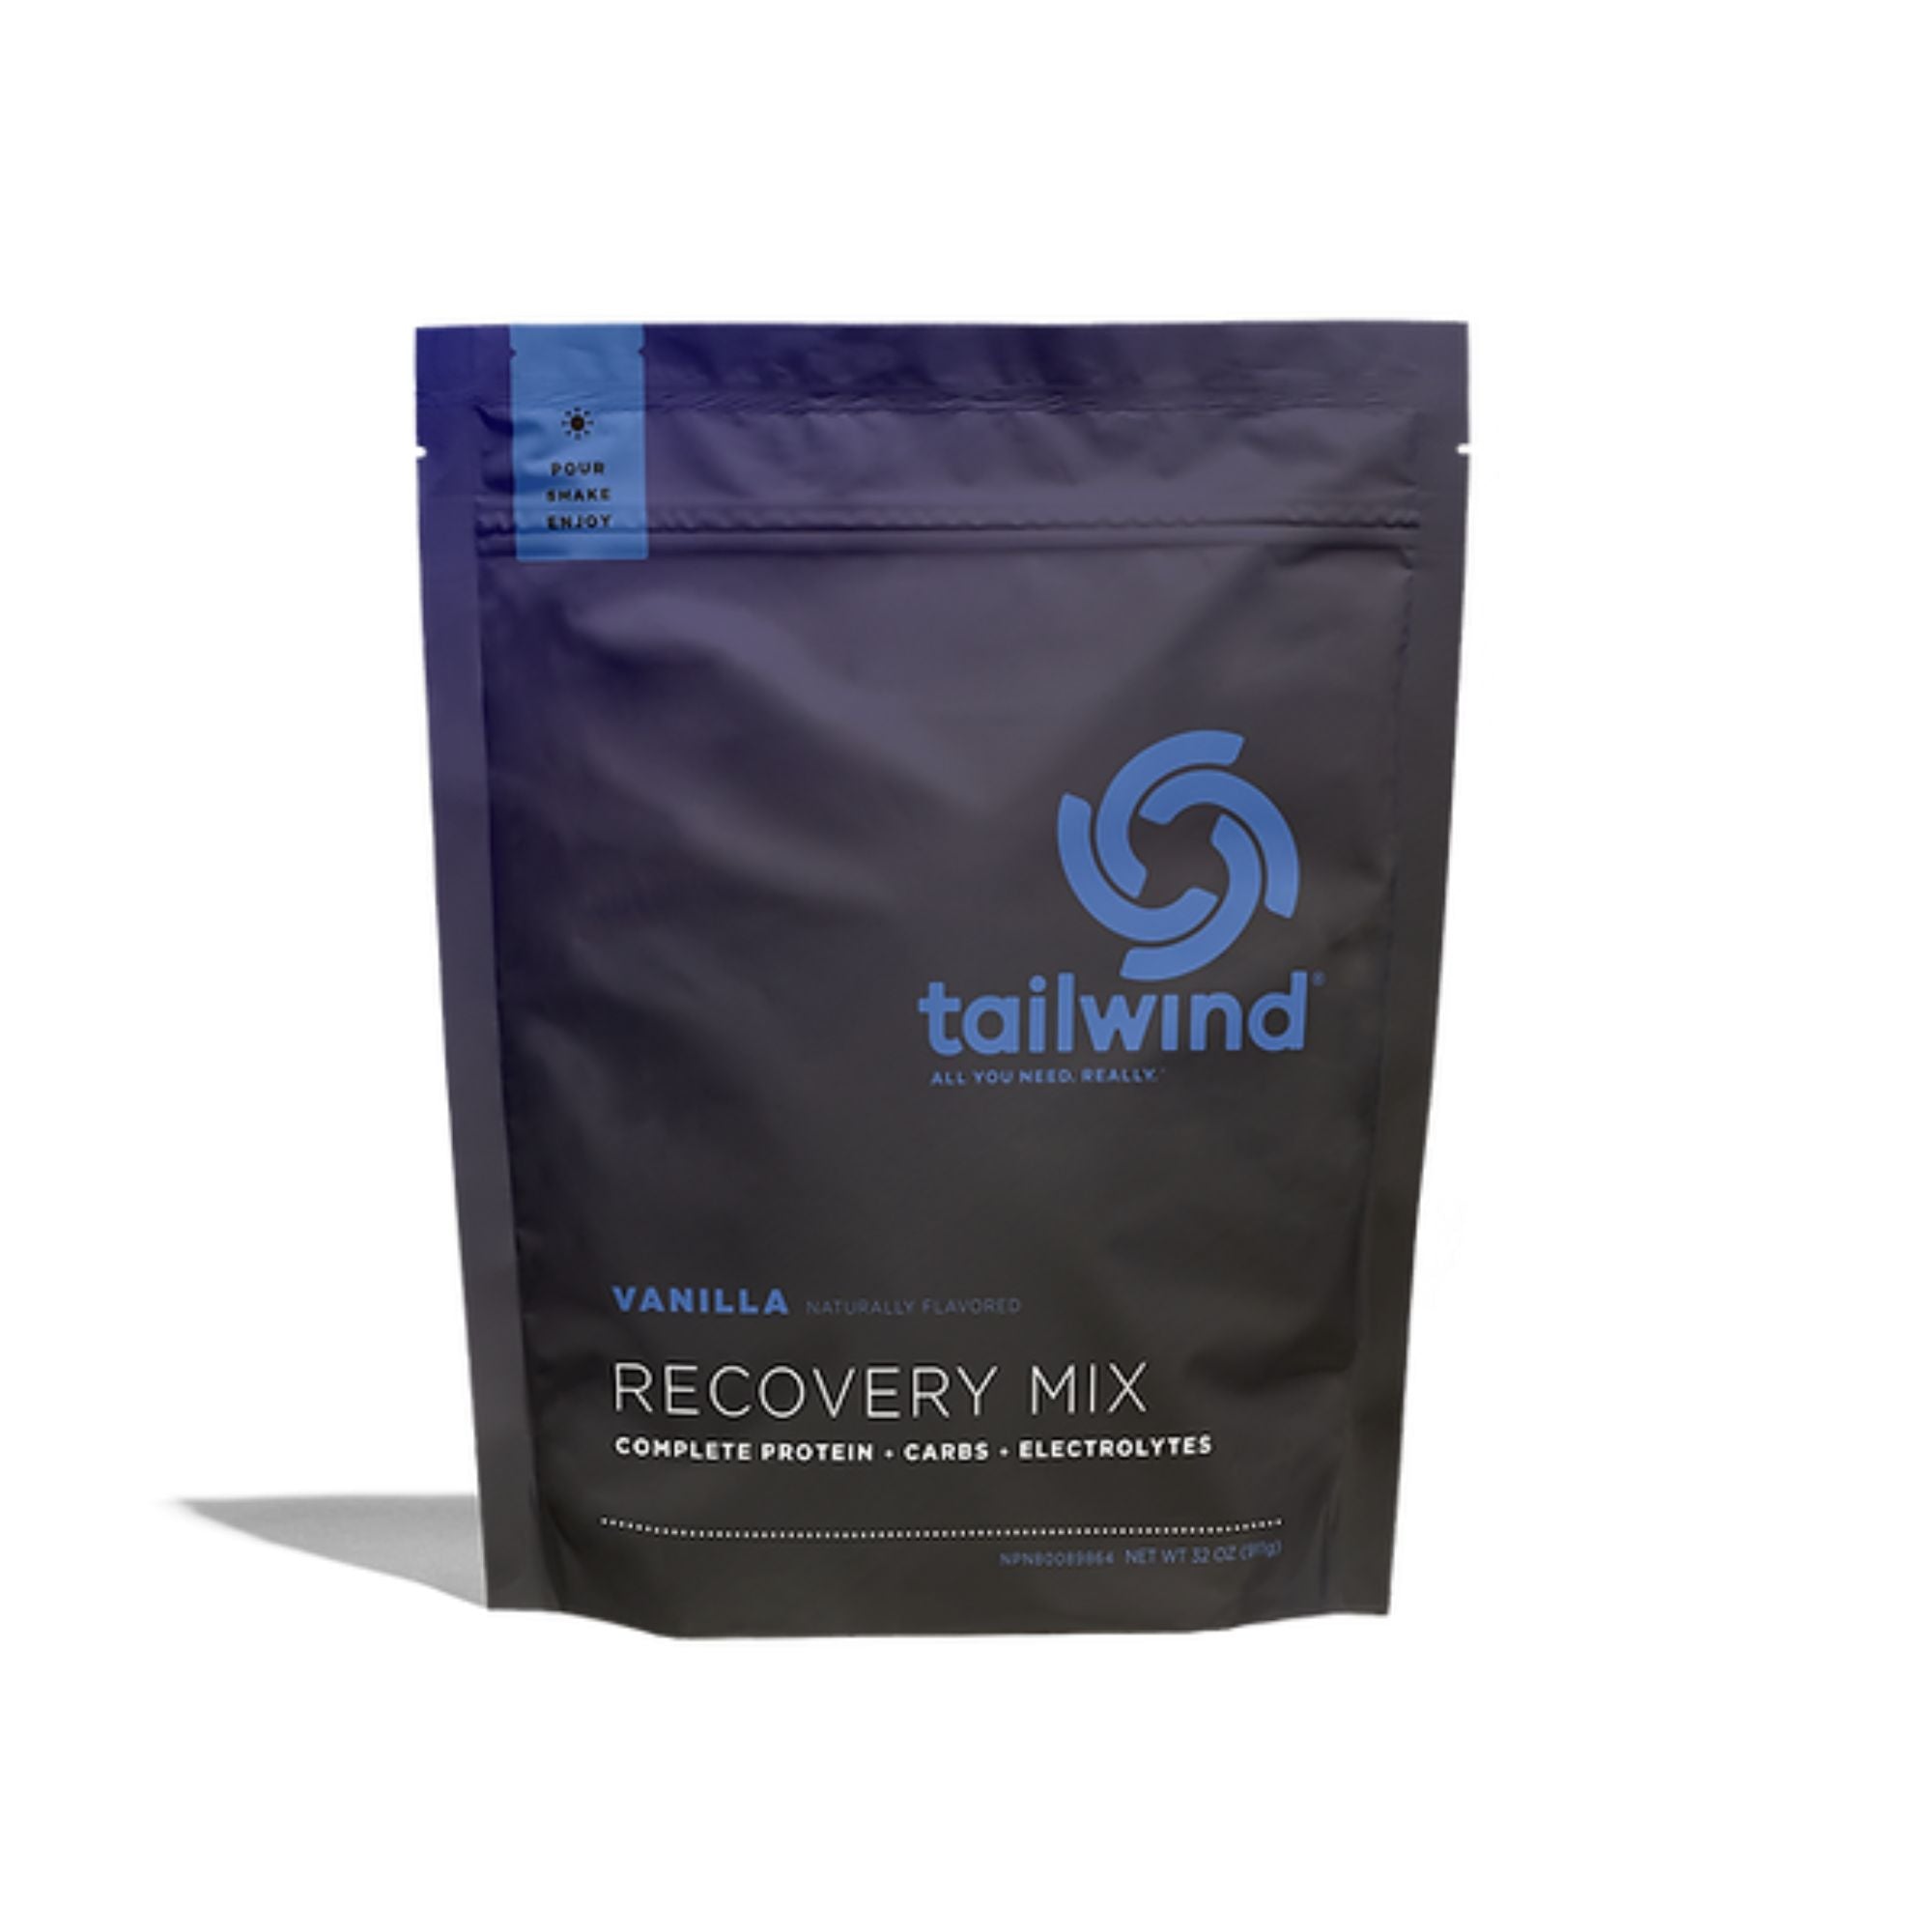 Tailwind Recovery Mix Endurance Supplement